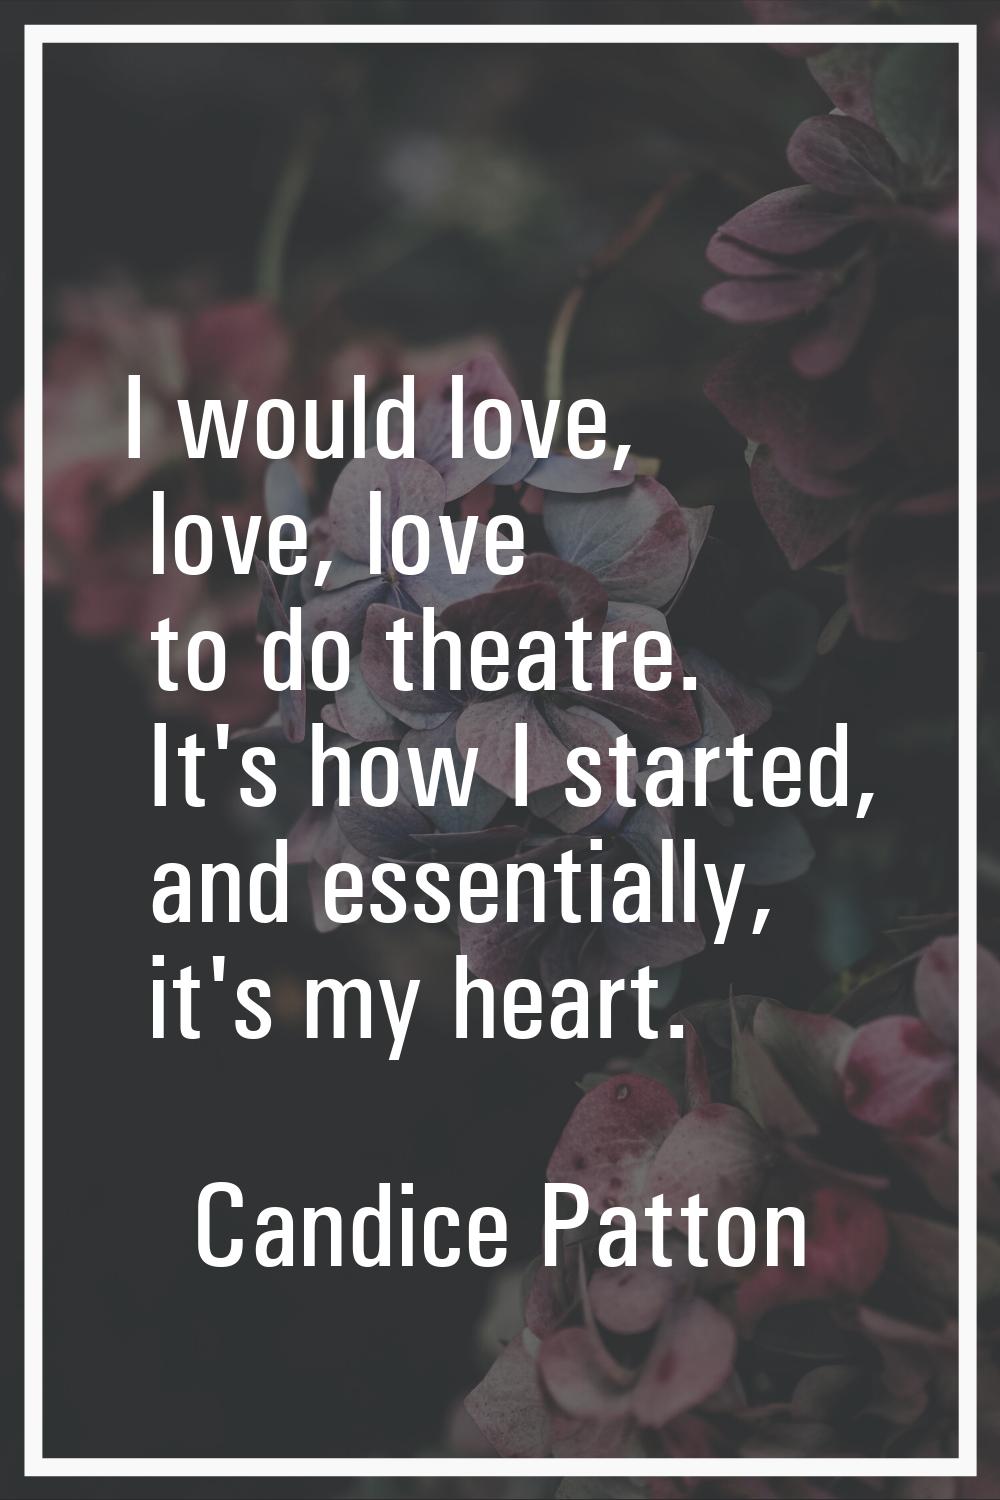 I would love, love, love to do theatre. It's how I started, and essentially, it's my heart.